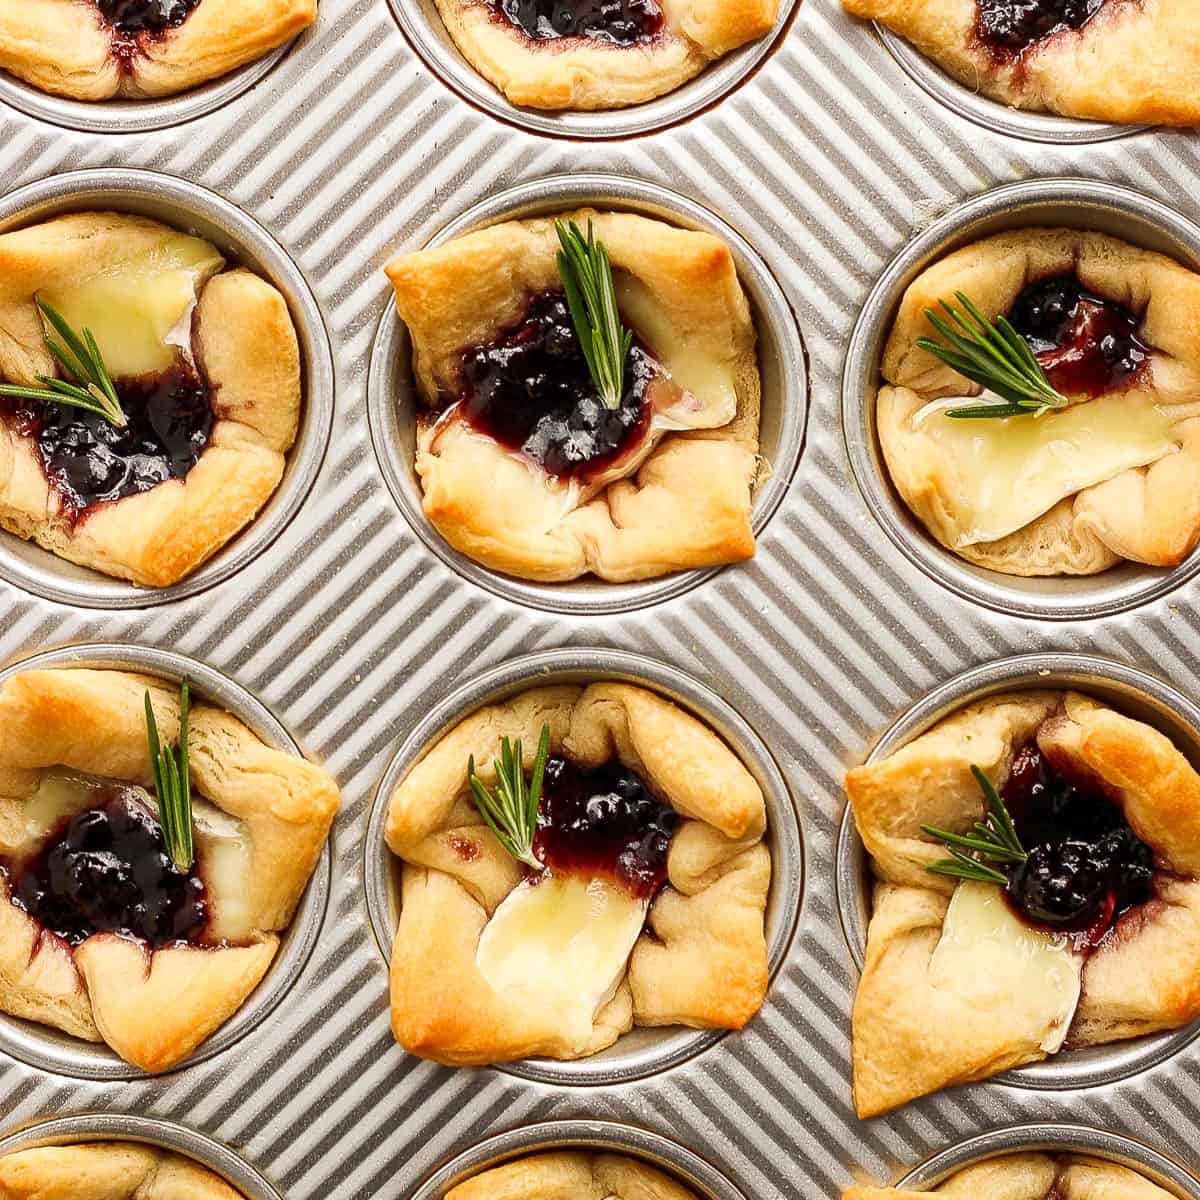 Top down shot of a muffin pan filled with baked brie bites.